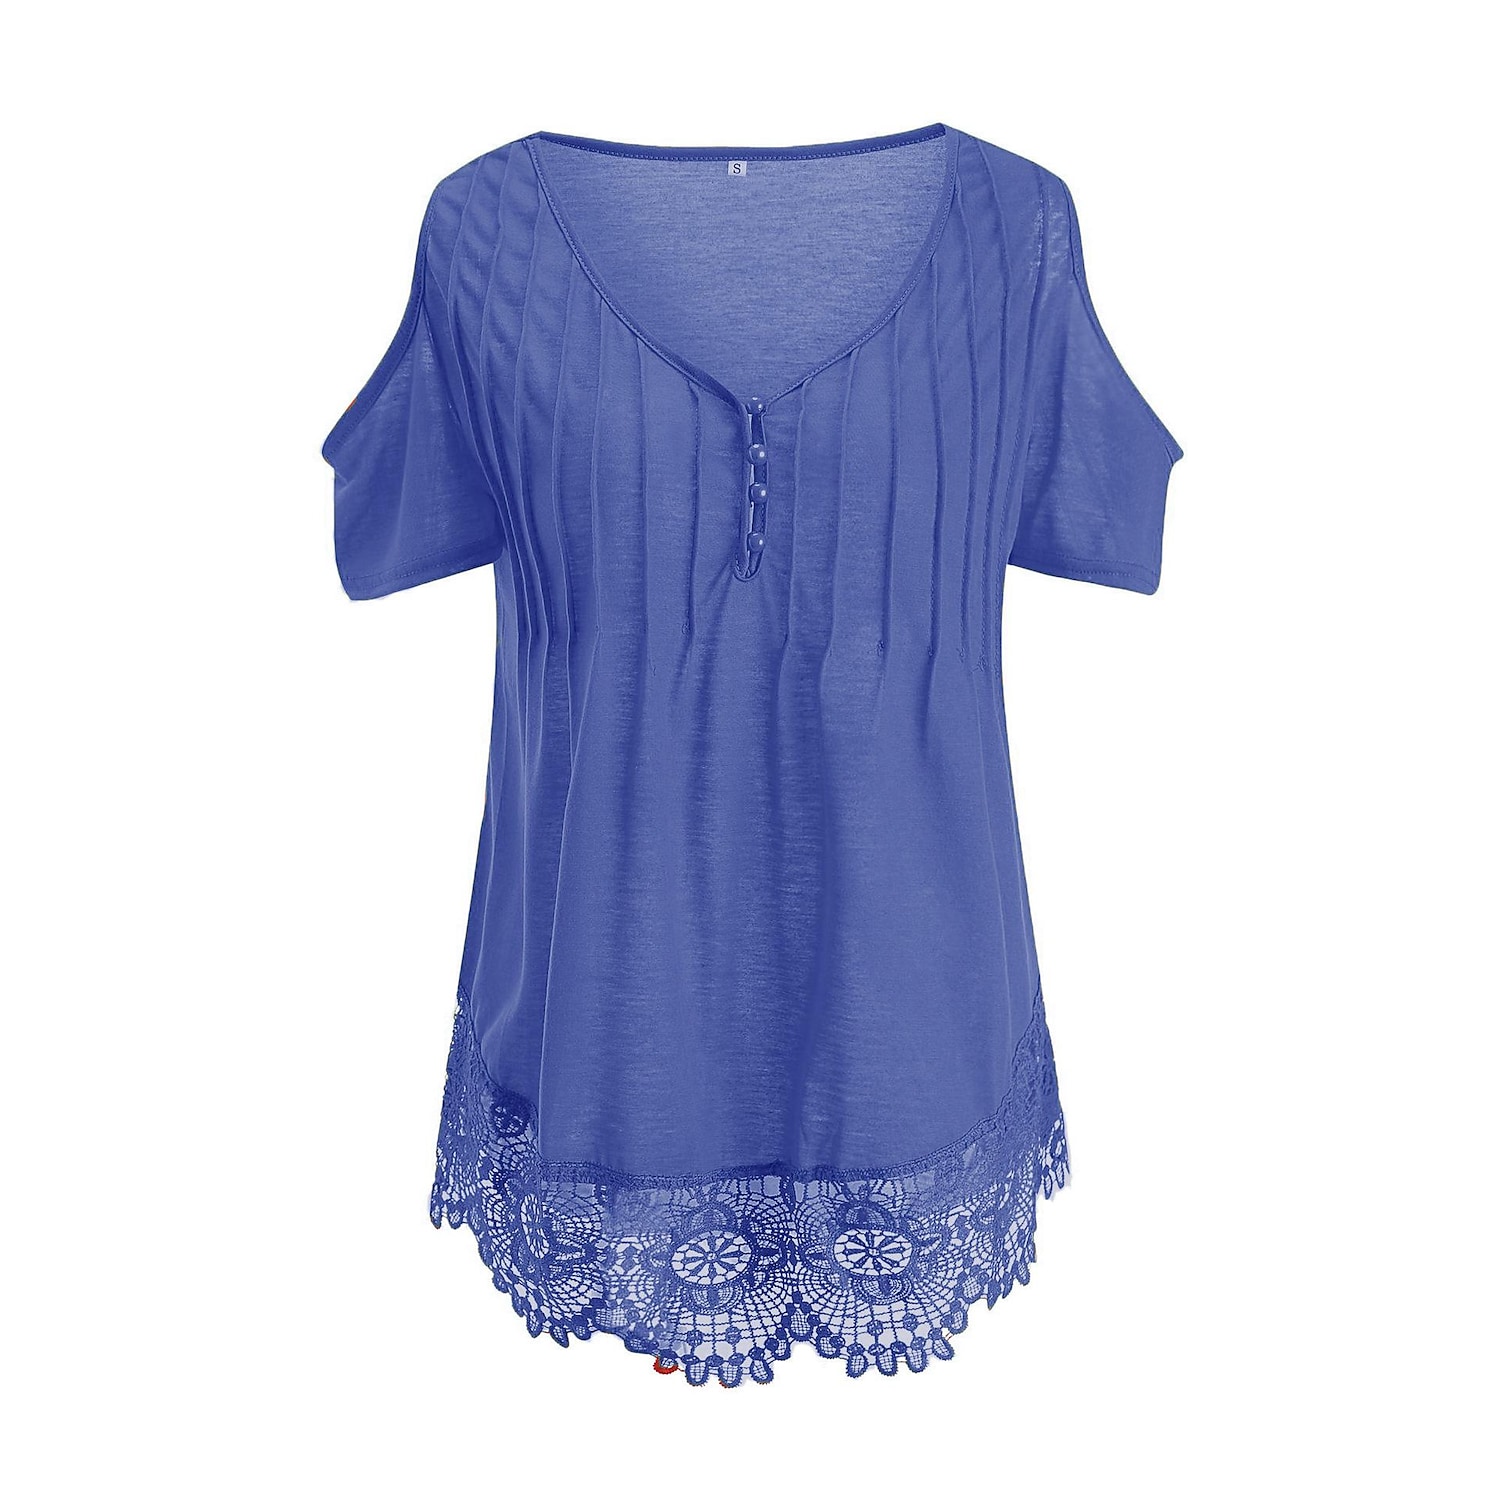 Women's Summer Lace Off-the-shoulder Short-sleeved T-shirt Casual Top